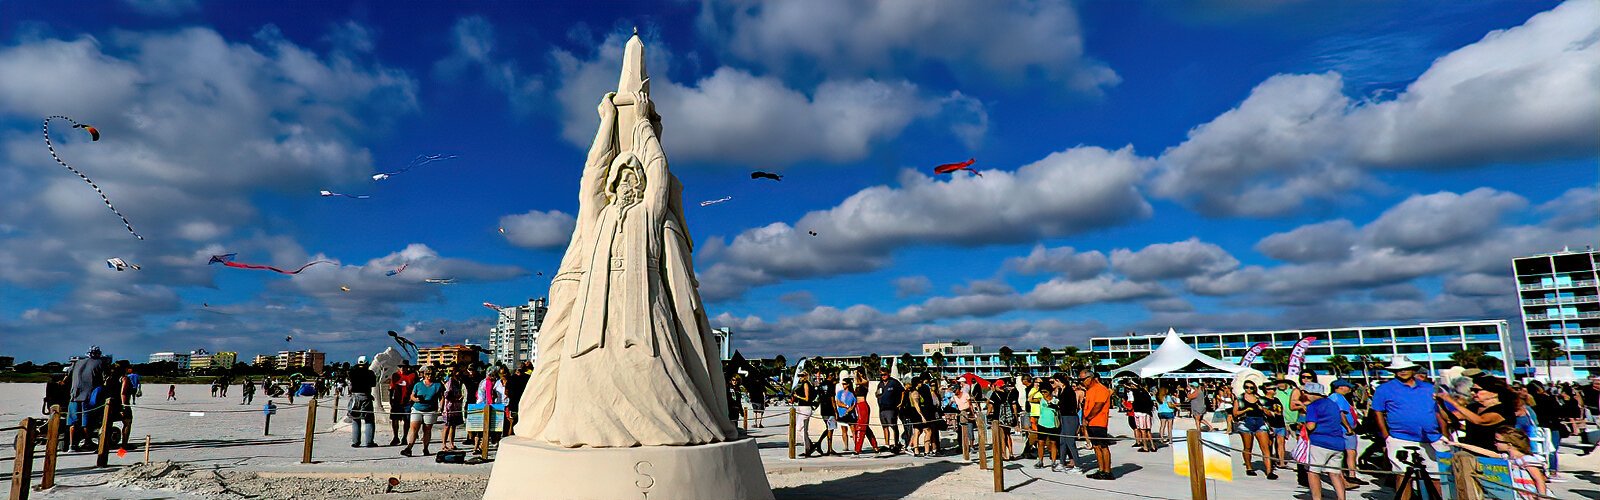 The “Sun Dial," which actually marks the passage of time, is one of the sand sculptures created for the Sanding Ovations “It’s About Time” exhibition at Treasure Island in Pinellas County.